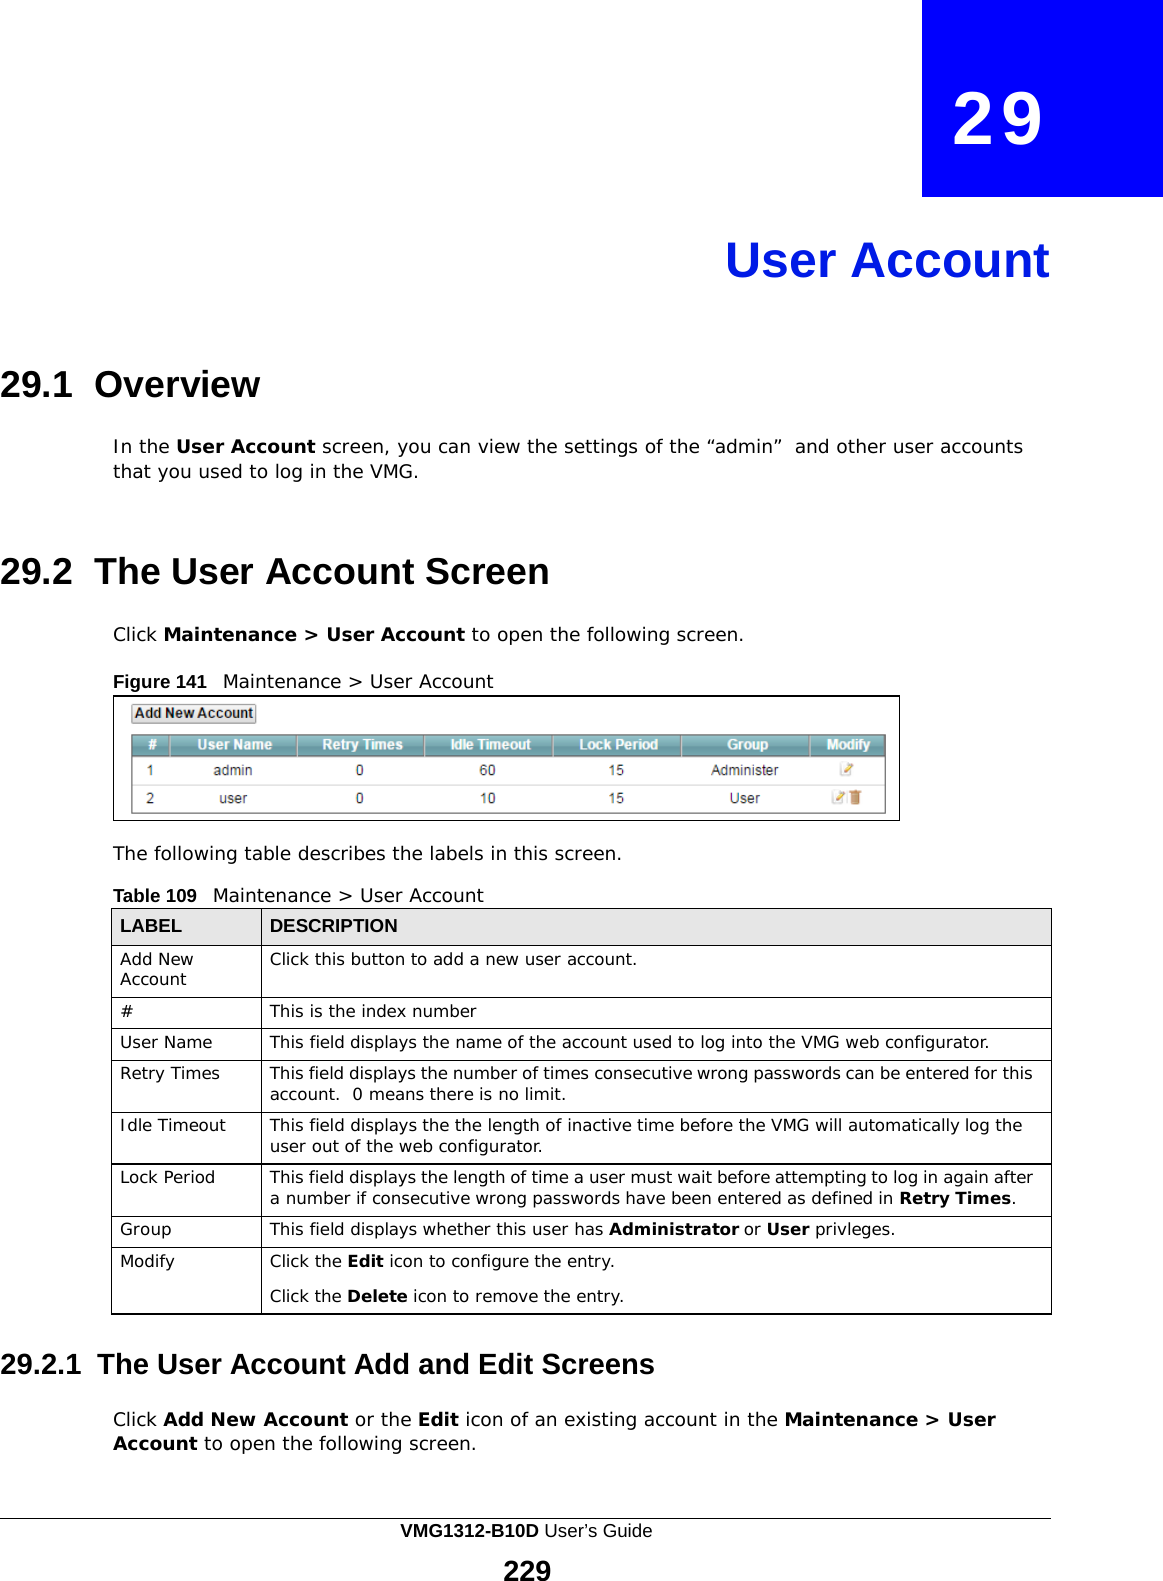 29       User Account     29.1 Overview  In the User Account screen, you can view the settings of the “admin” and other user accounts that you used to log in the VMG.    29.2  The User Account Screen  Click Maintenance &gt; User Account to open the following screen.  Figure 141   Maintenance &gt; User Account        The following table describes the labels in this screen.  Table 109   Maintenance &gt; User Account  LABEL DESCRIPTION Add New Account Click this button to add a new user account. # This is the index number User Name This field displays the name of the account used to log into the VMG web configurator. Retry Times This field displays the number of times consecutive wrong passwords can be entered for this account. 0 means there is no limit. Idle Timeout This field displays the the length of inactive time before the VMG will automatically log the user out of the web configurator. Lock Period This field displays the length of time a user must wait before attempting to log in again after a number if consecutive wrong passwords have been entered as defined in Retry Times. Group This field displays whether this user has Administrator or User privleges. Modify Click the Edit icon to configure the entry.  Click the Delete icon to remove the entry.  29.2.1  The User Account Add and Edit Screens  Click Add New Account or the Edit icon of an existing account in the Maintenance &gt; User Account to open the following screen. VMG1312-B10D User’s Guide  229  